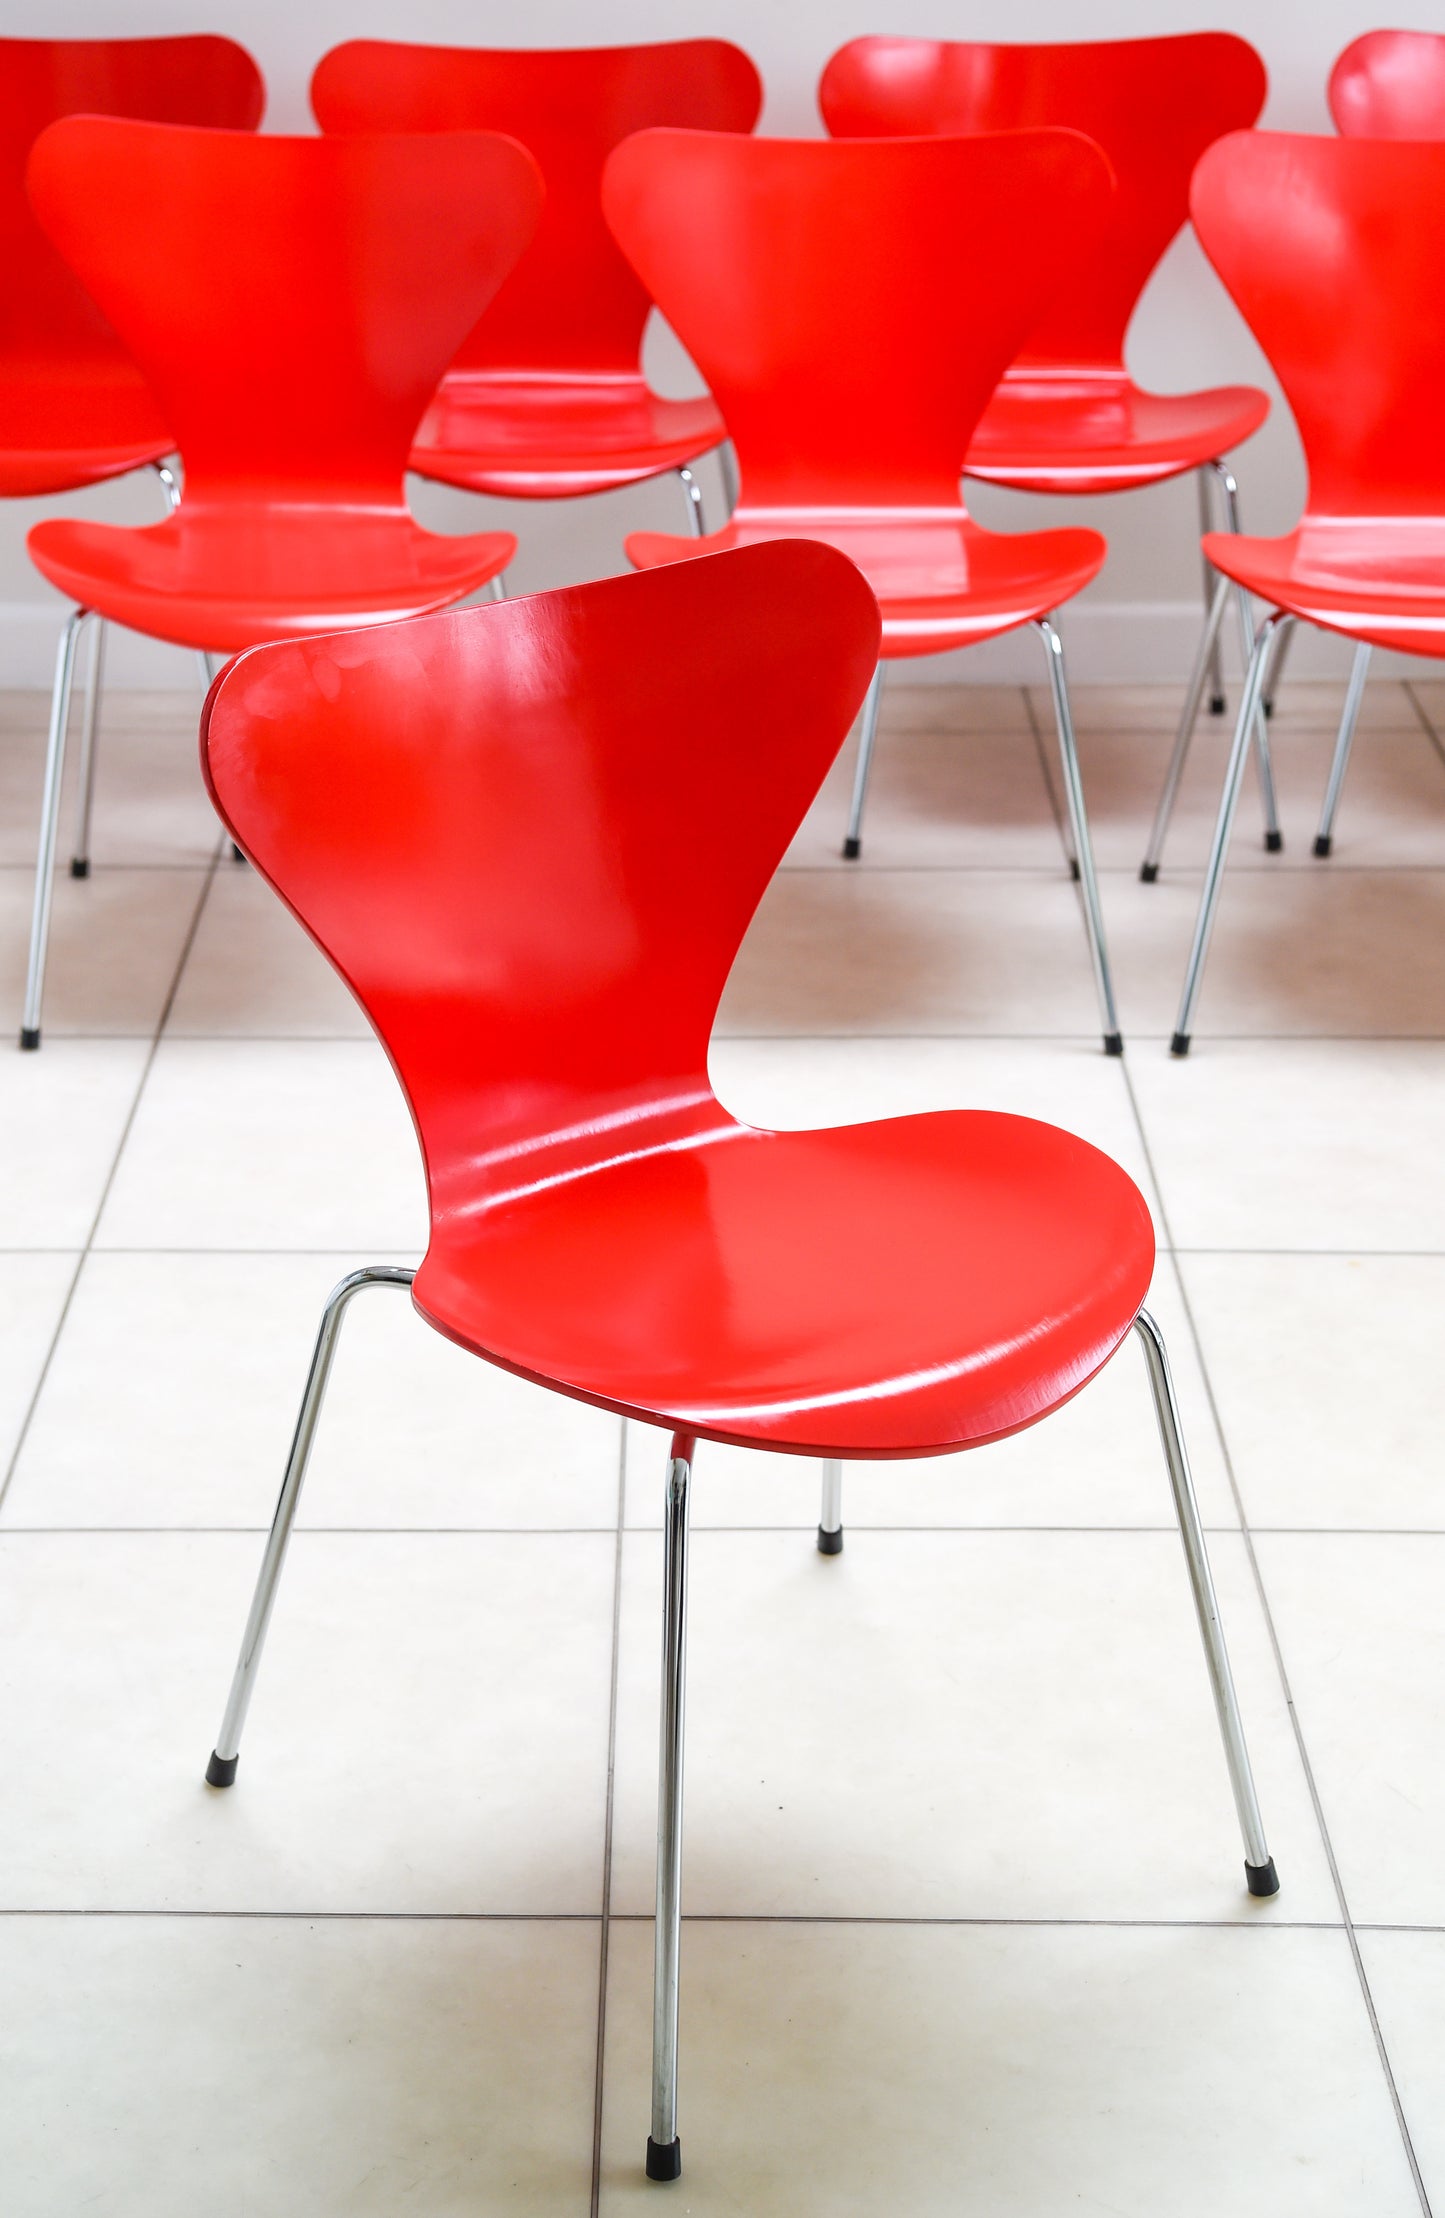 SERIES 7 STACKABLE CHAIRS 3107 BY ARNE JACOBSEN FOR FRITZ HANSEN IN GALA RED